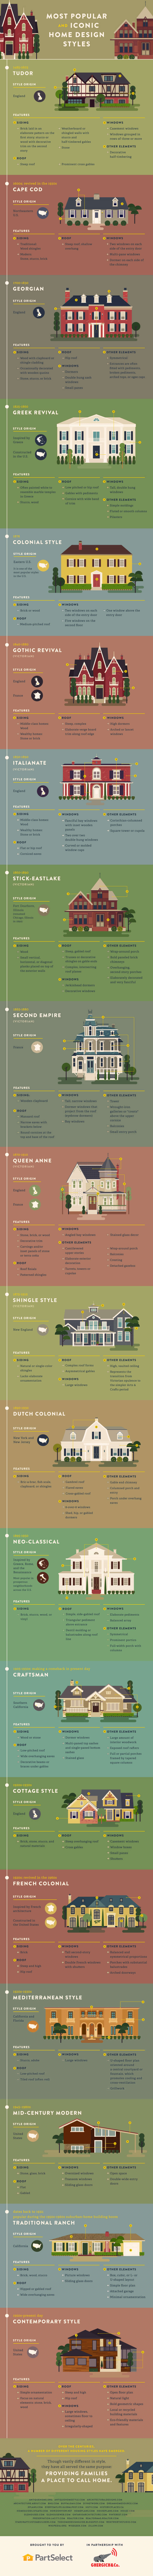 Best Infographics: Most Popular and Iconic Home Design Styles